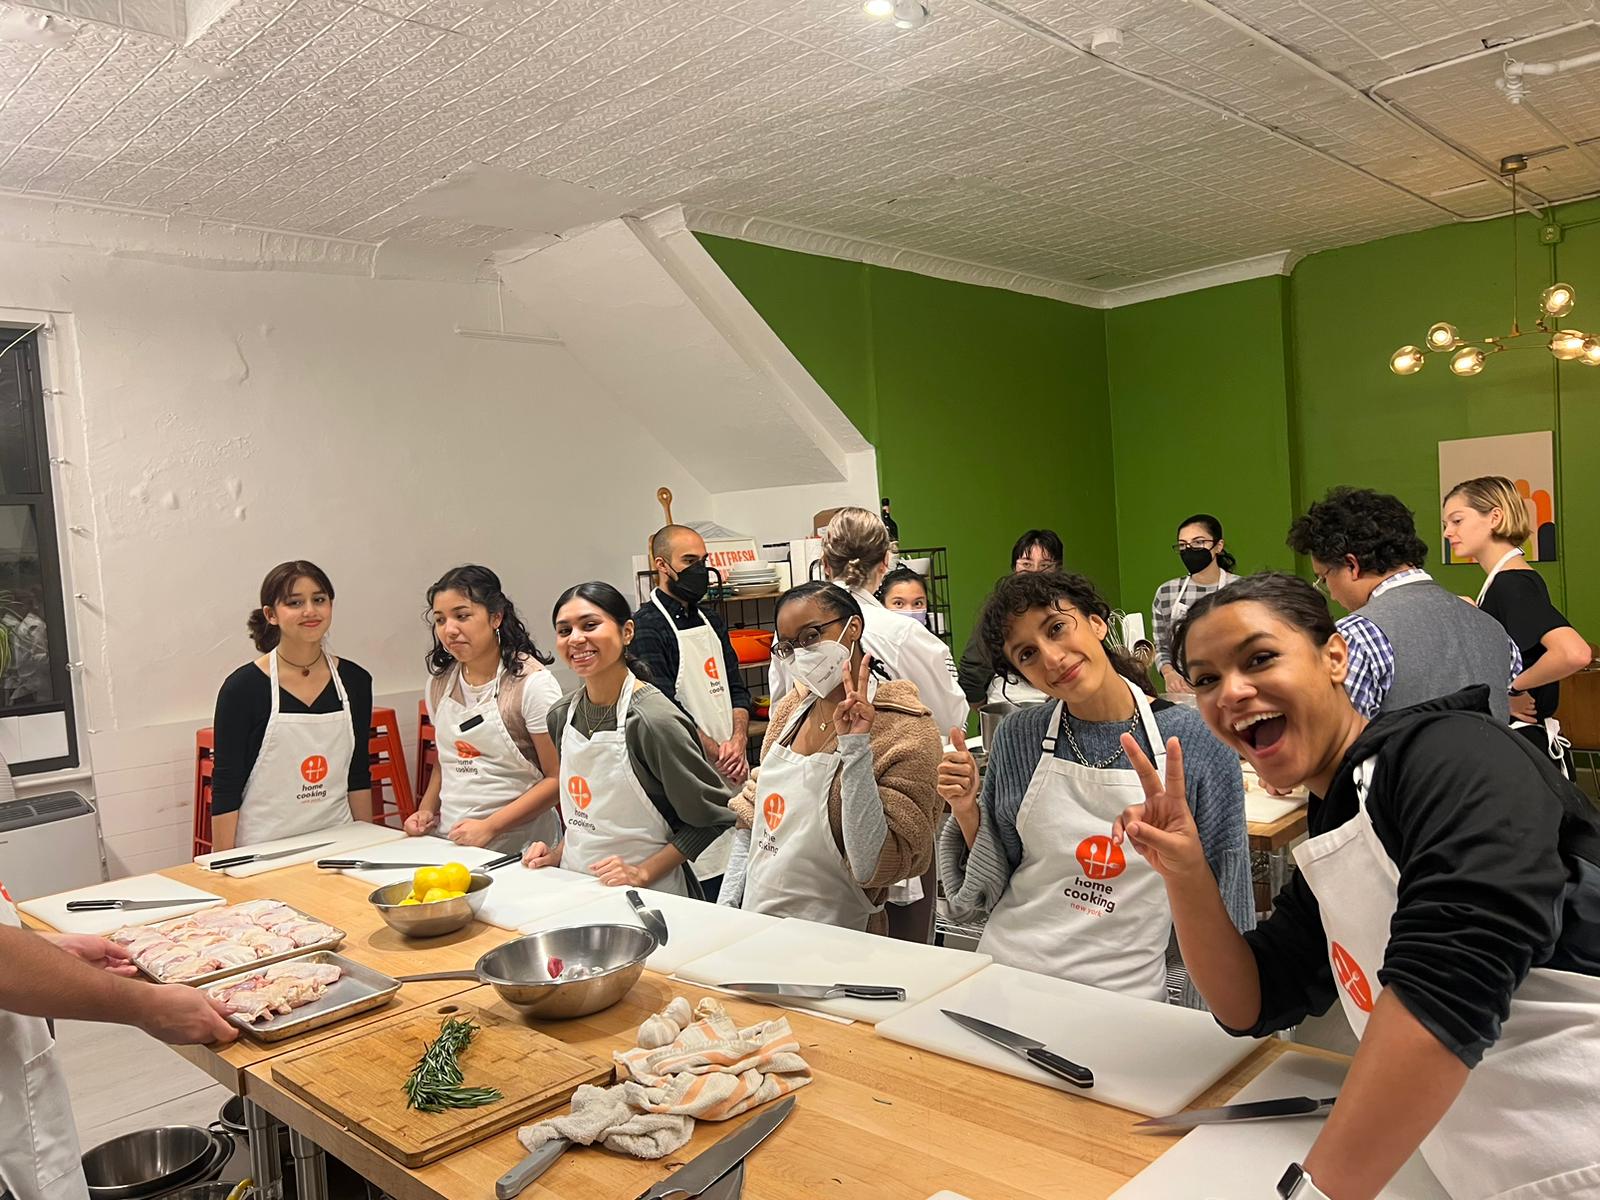 Students of color taking a cooking class. All are wearing aprons.